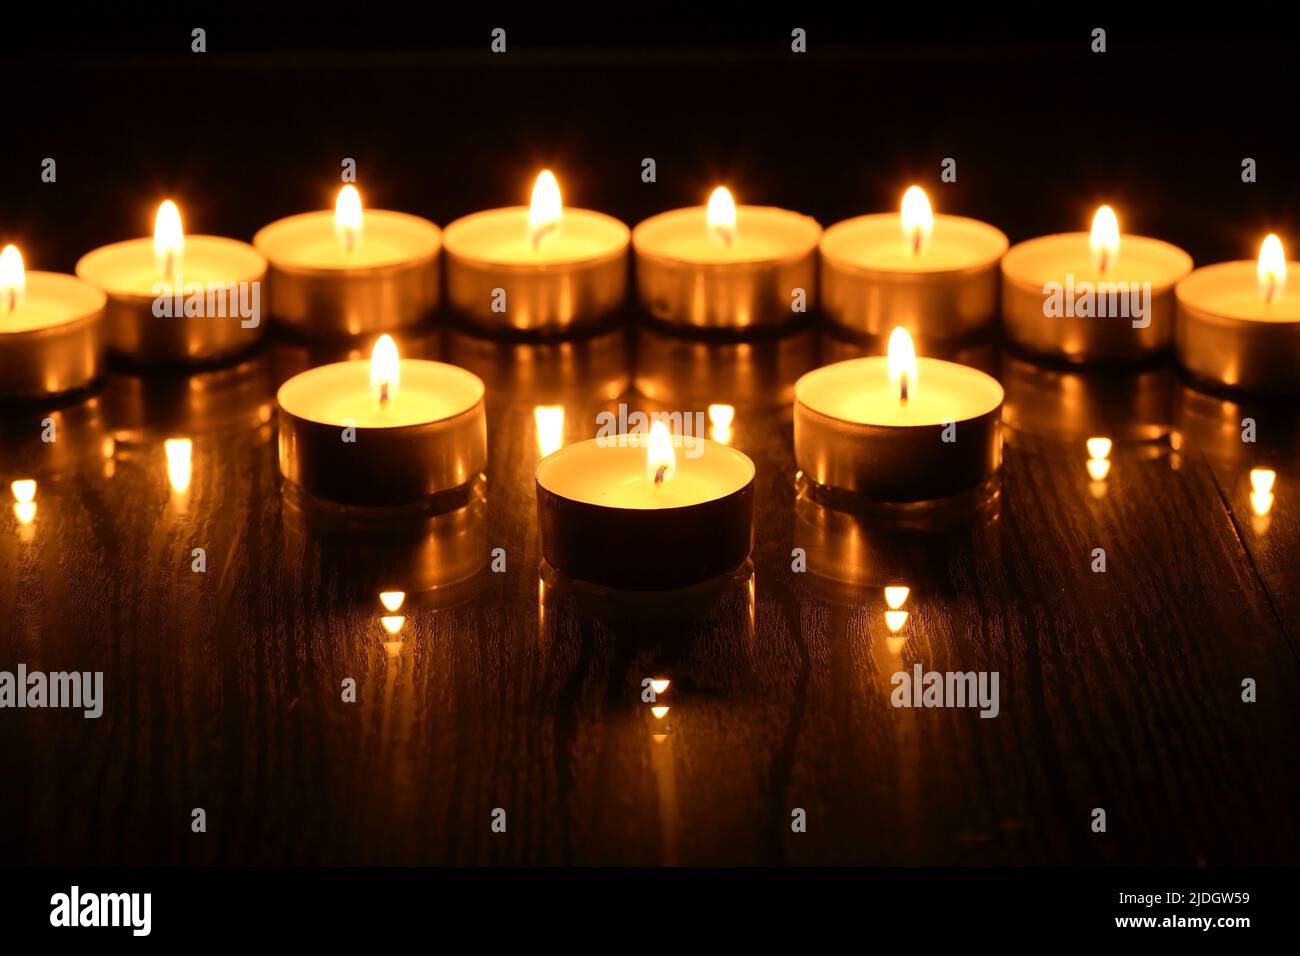 Set of flighting candles in a row against dark background Stock Photo